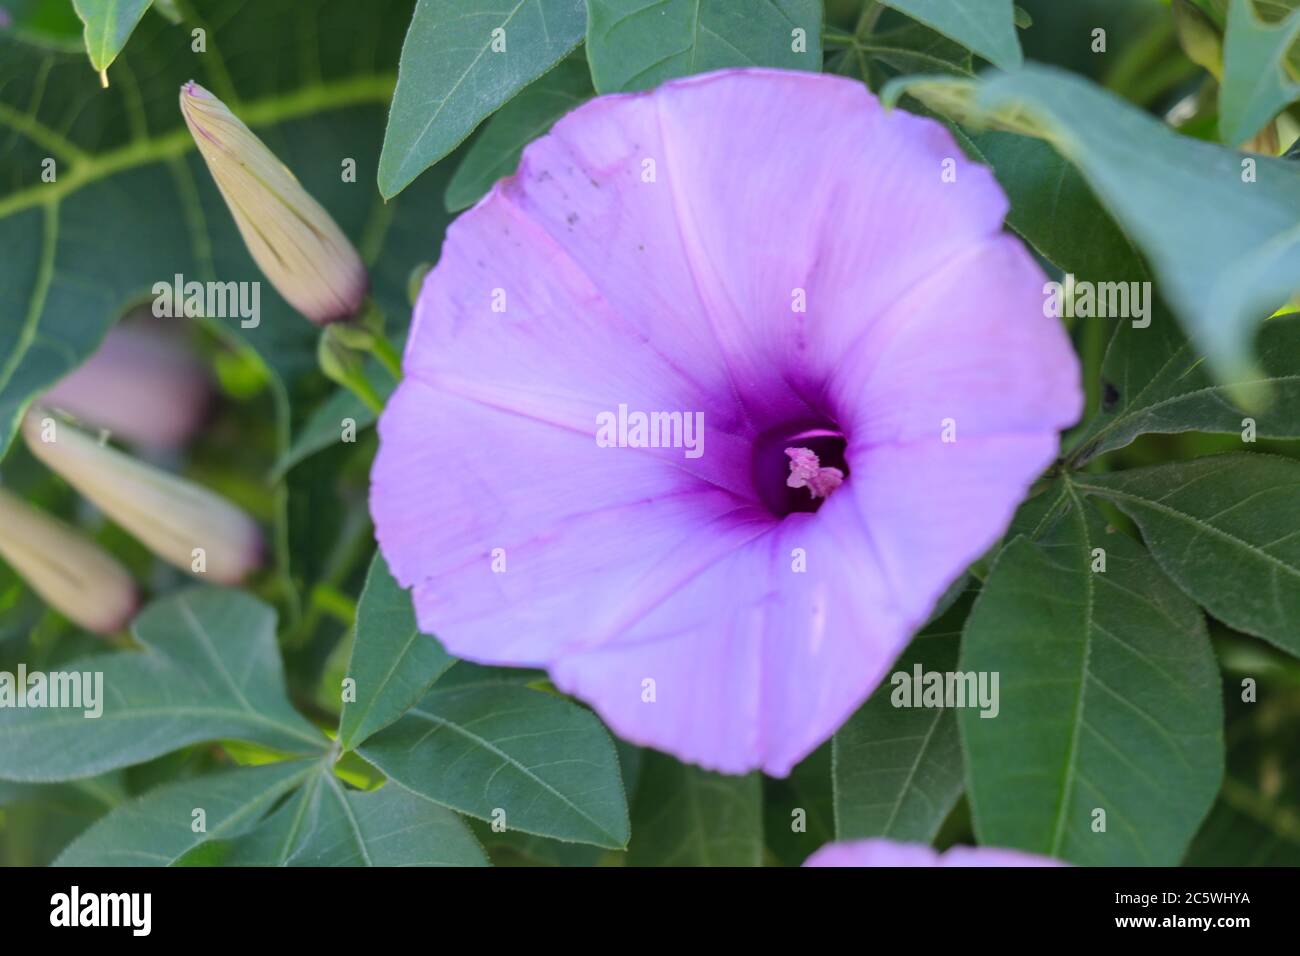 Brightly lavender flower Ipomoea cairica close-up. Pink flower on a background of green leaves Stock Photo